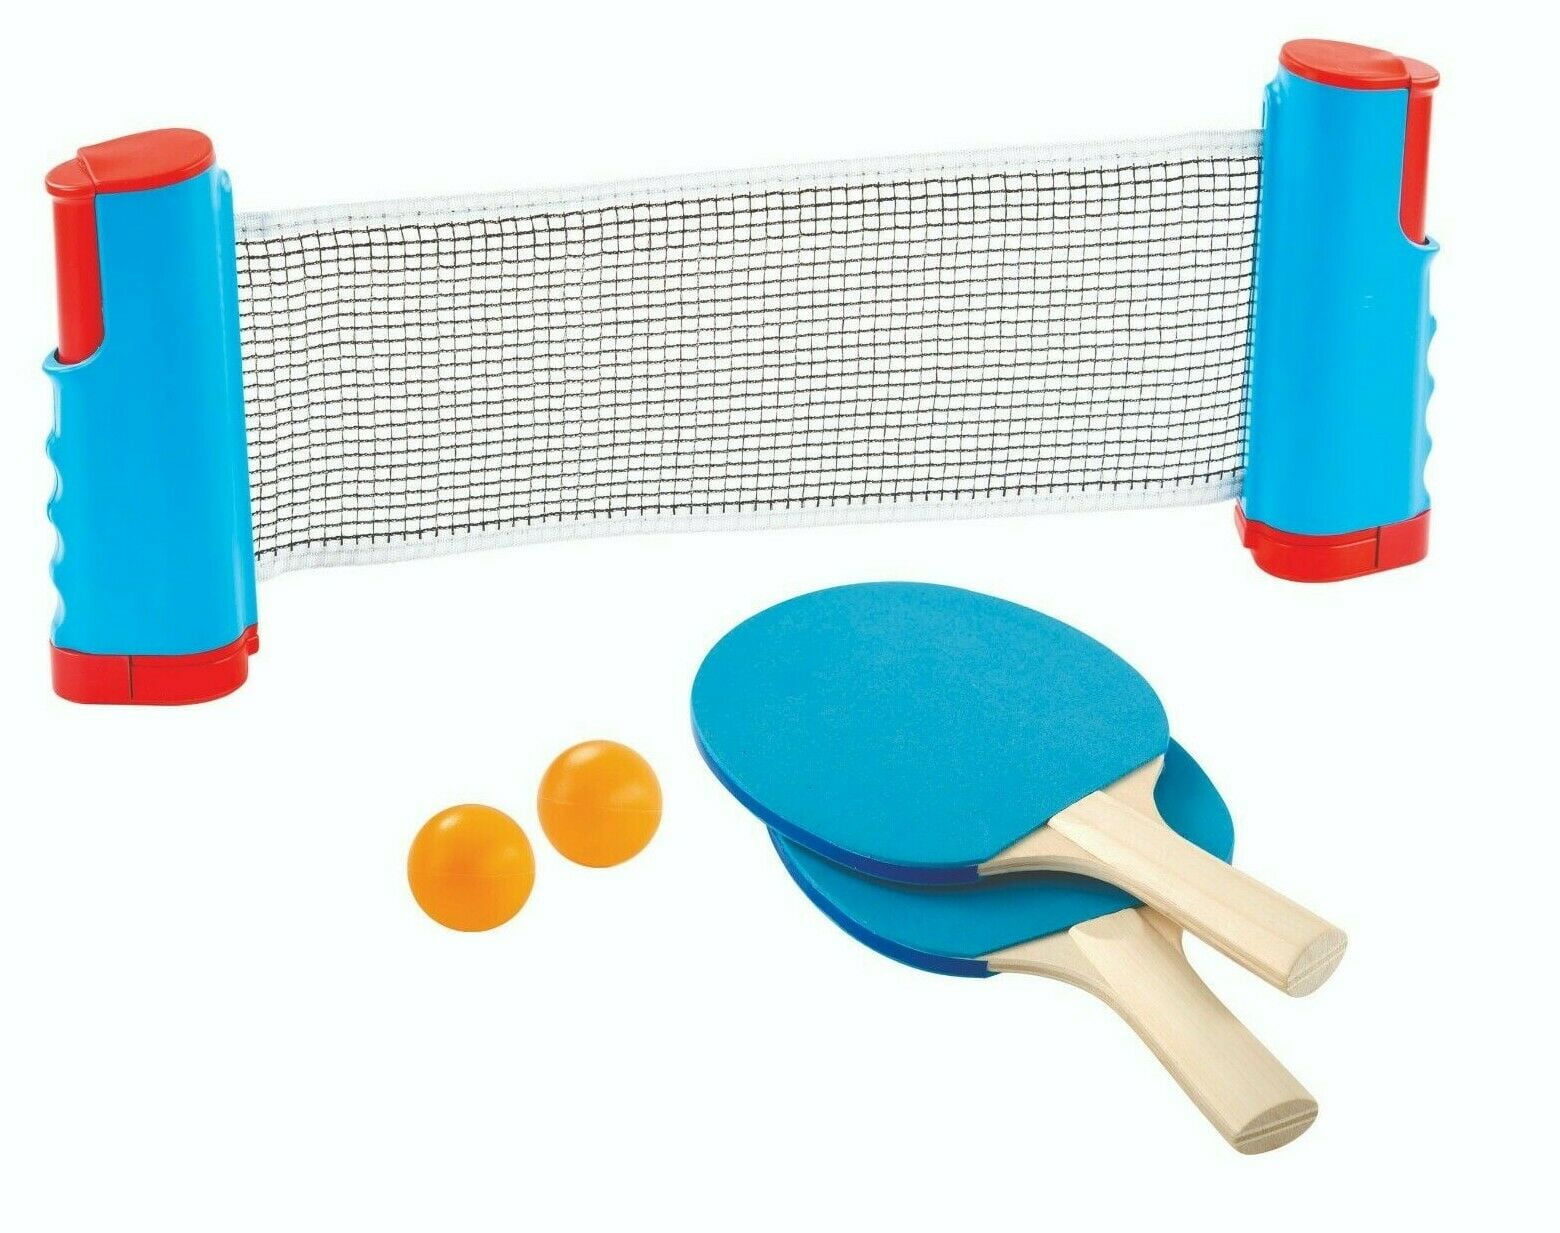 Retractable Table Tennis Ping Pong Portable Net Kit The Pongy Express Brand 